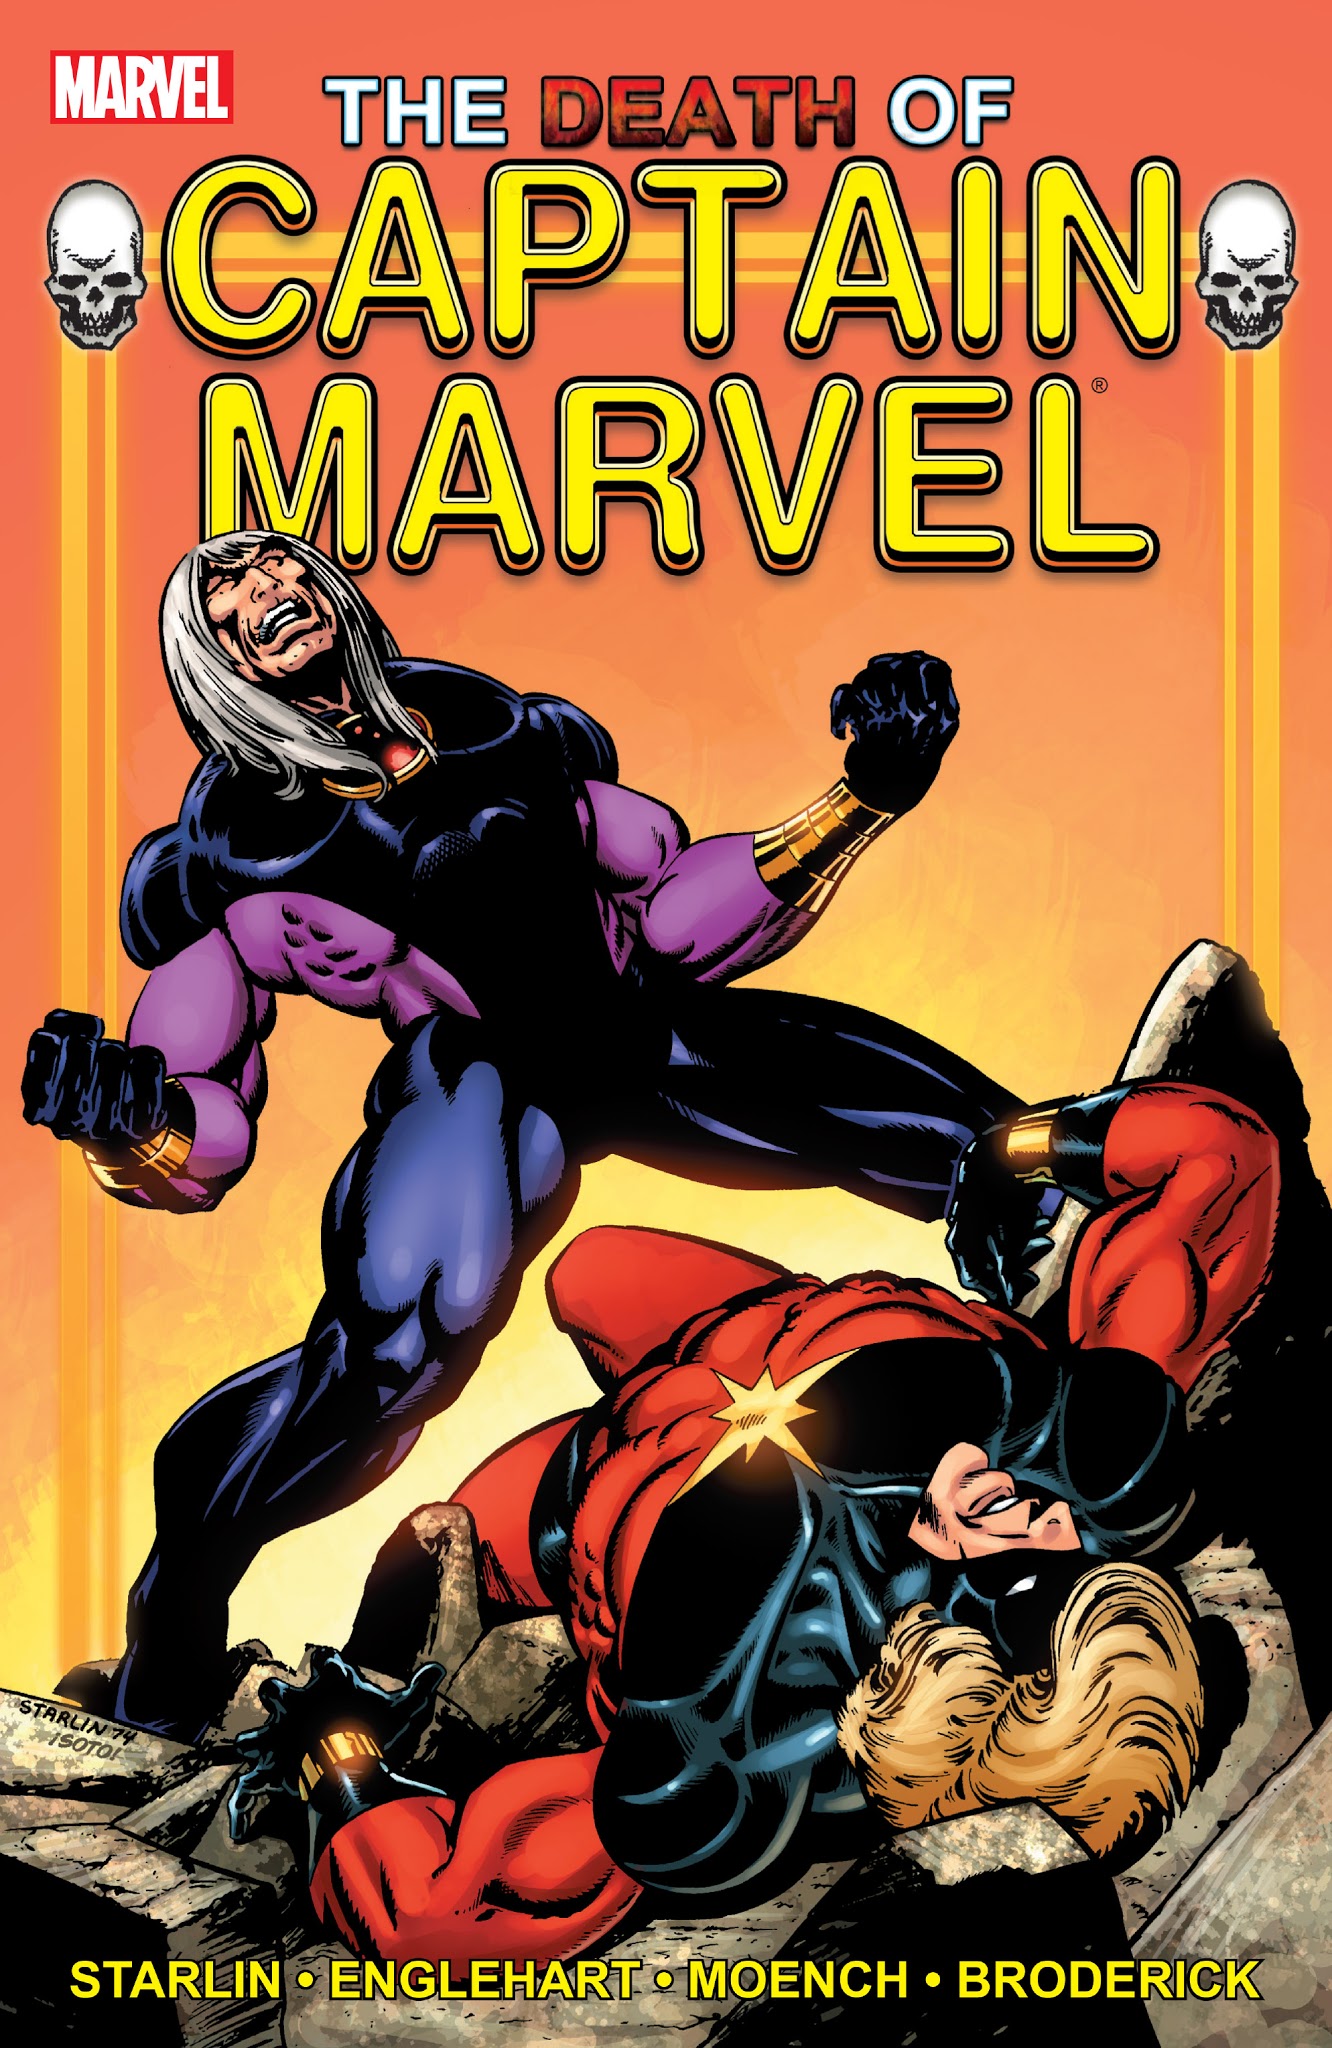 Read online Captain Marvel: The Death of Captain Marvel comic -  Issue # TPB - 1